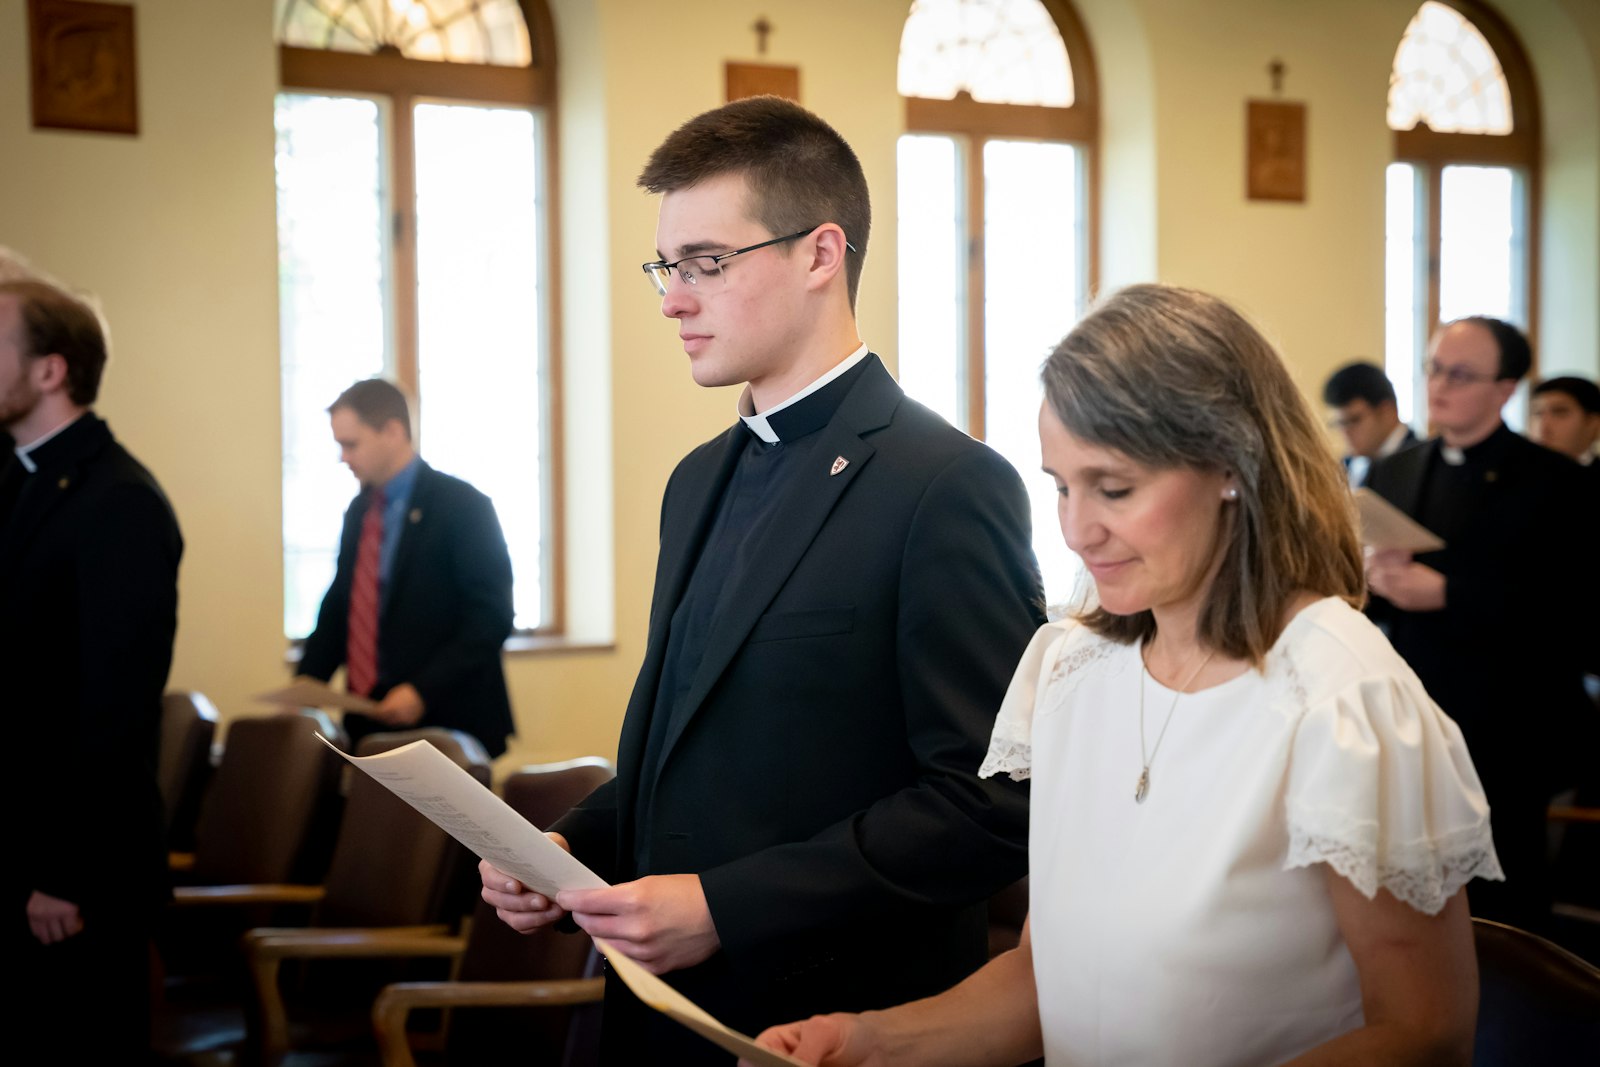 Seminarian Karl Finkbeiner of Our Lady of Good Counsel Parish in Plymouth wears clerics as he and his family pray during the Mass of Candidacy.